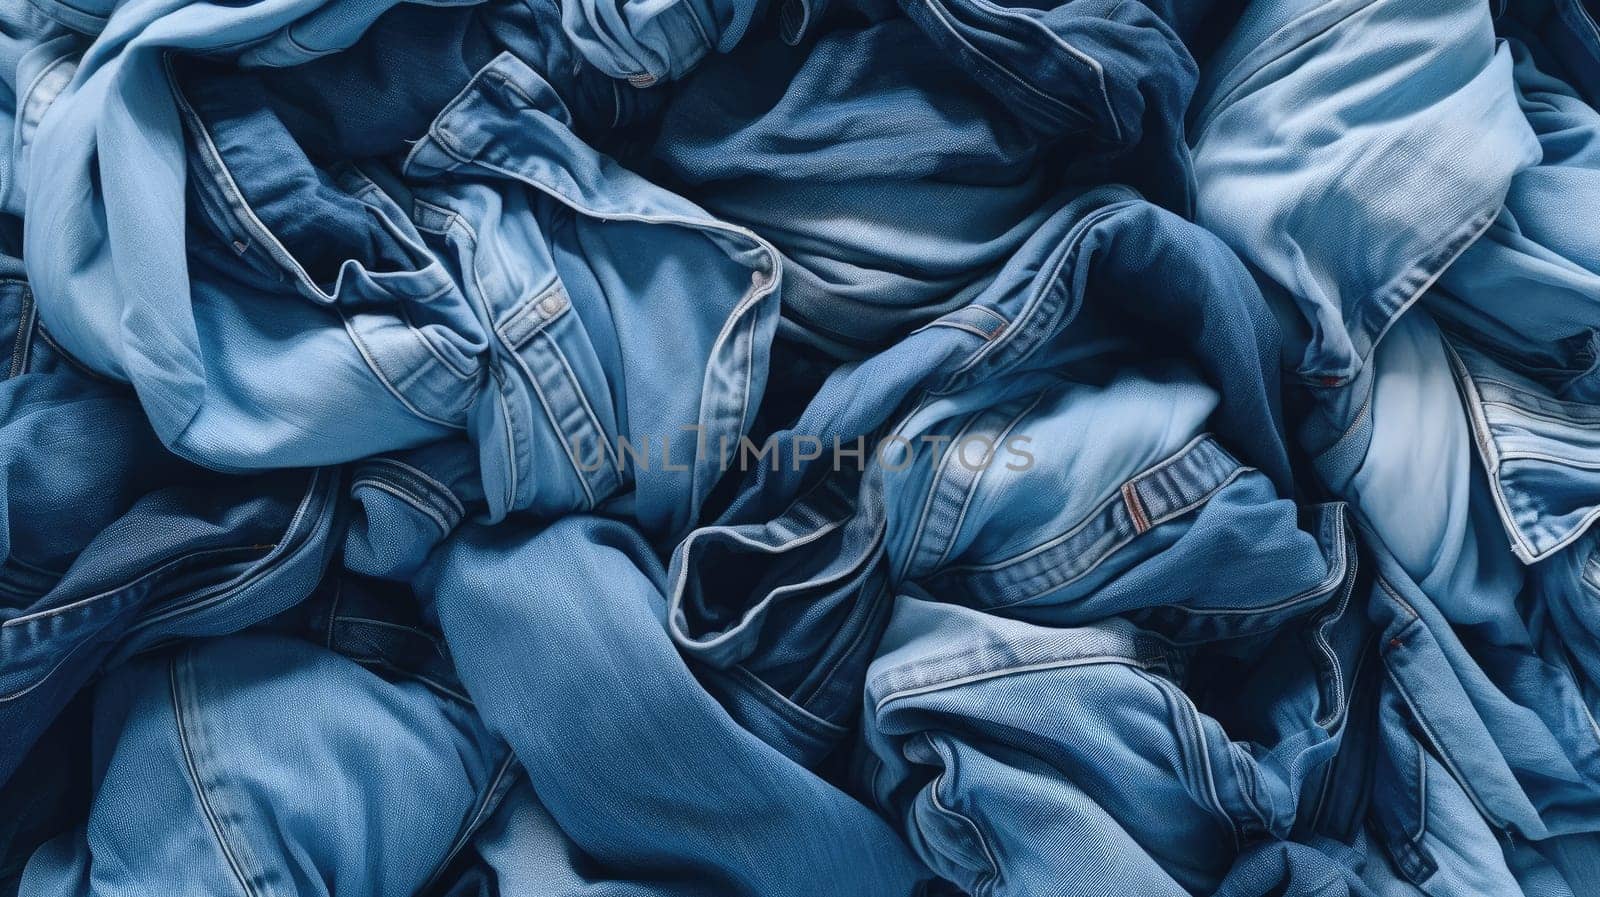 Assorted Denim Stack - Top View of Crumpled Blue Jeans as Background. Fashion Display with Textured Folded Denim Variety. Clothing Selection and Texture Concept for Design and Marketing by ViShark